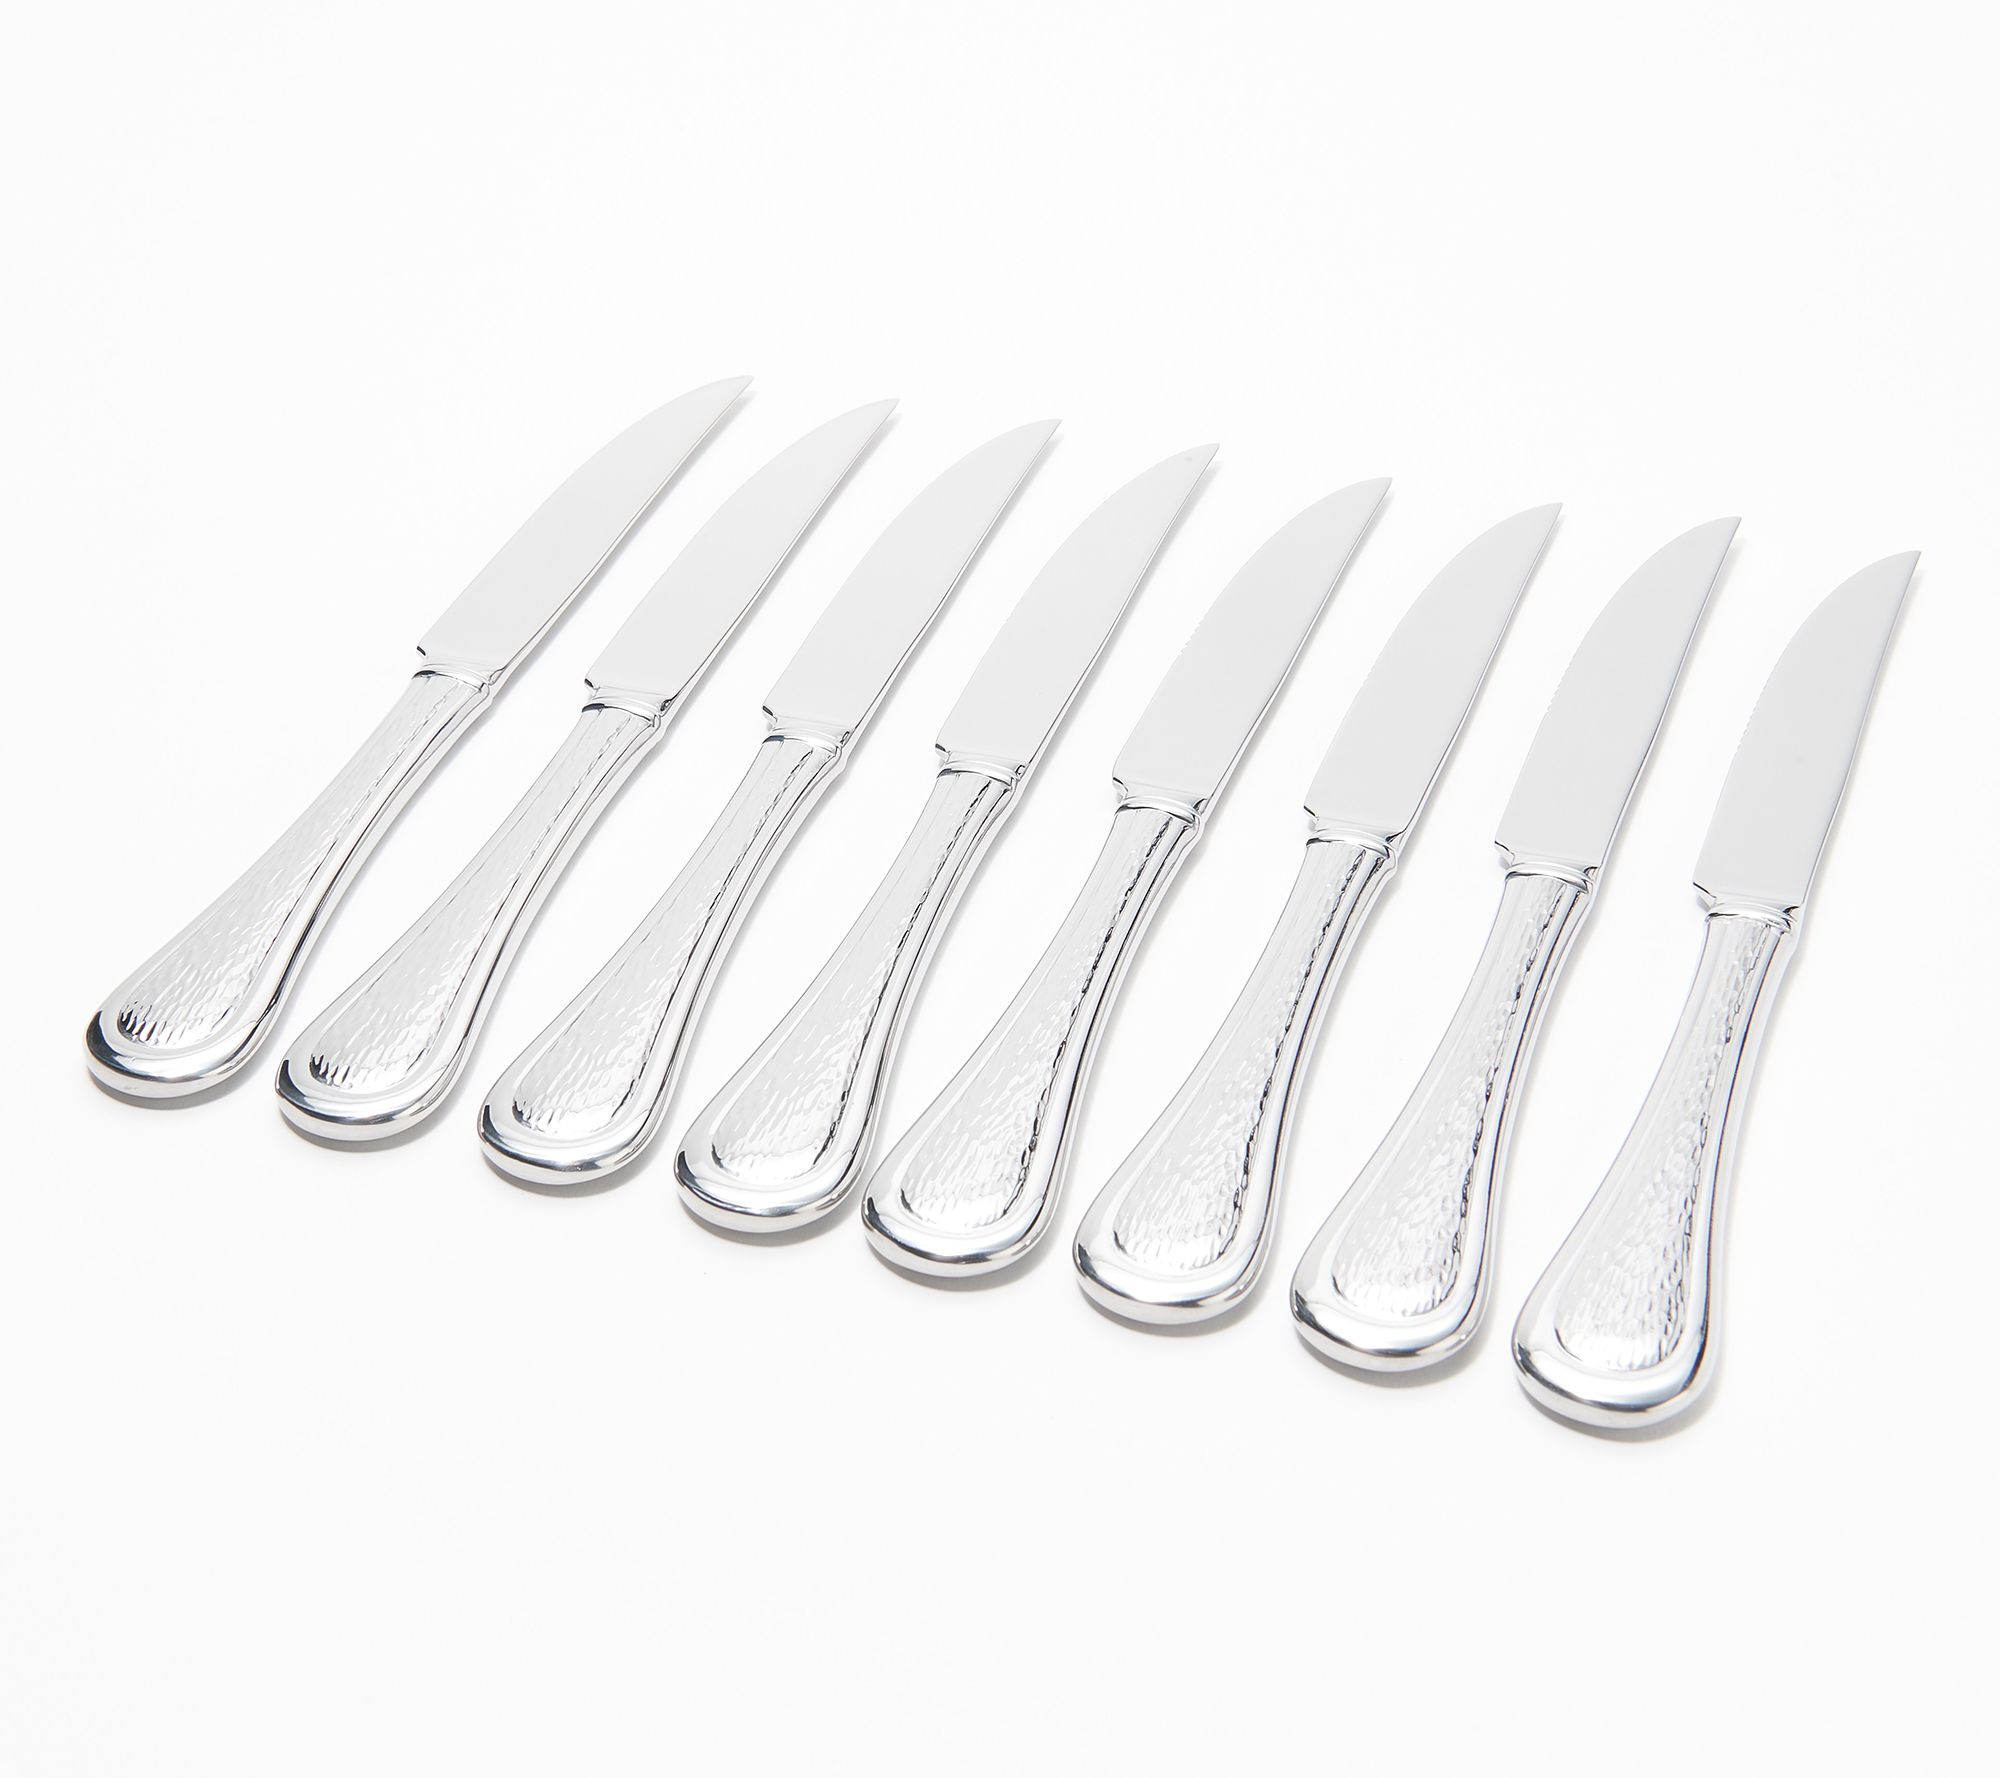 36-Piece Silverware Set with Steak Knives for 6, Food-Grade Stainless Steel  U